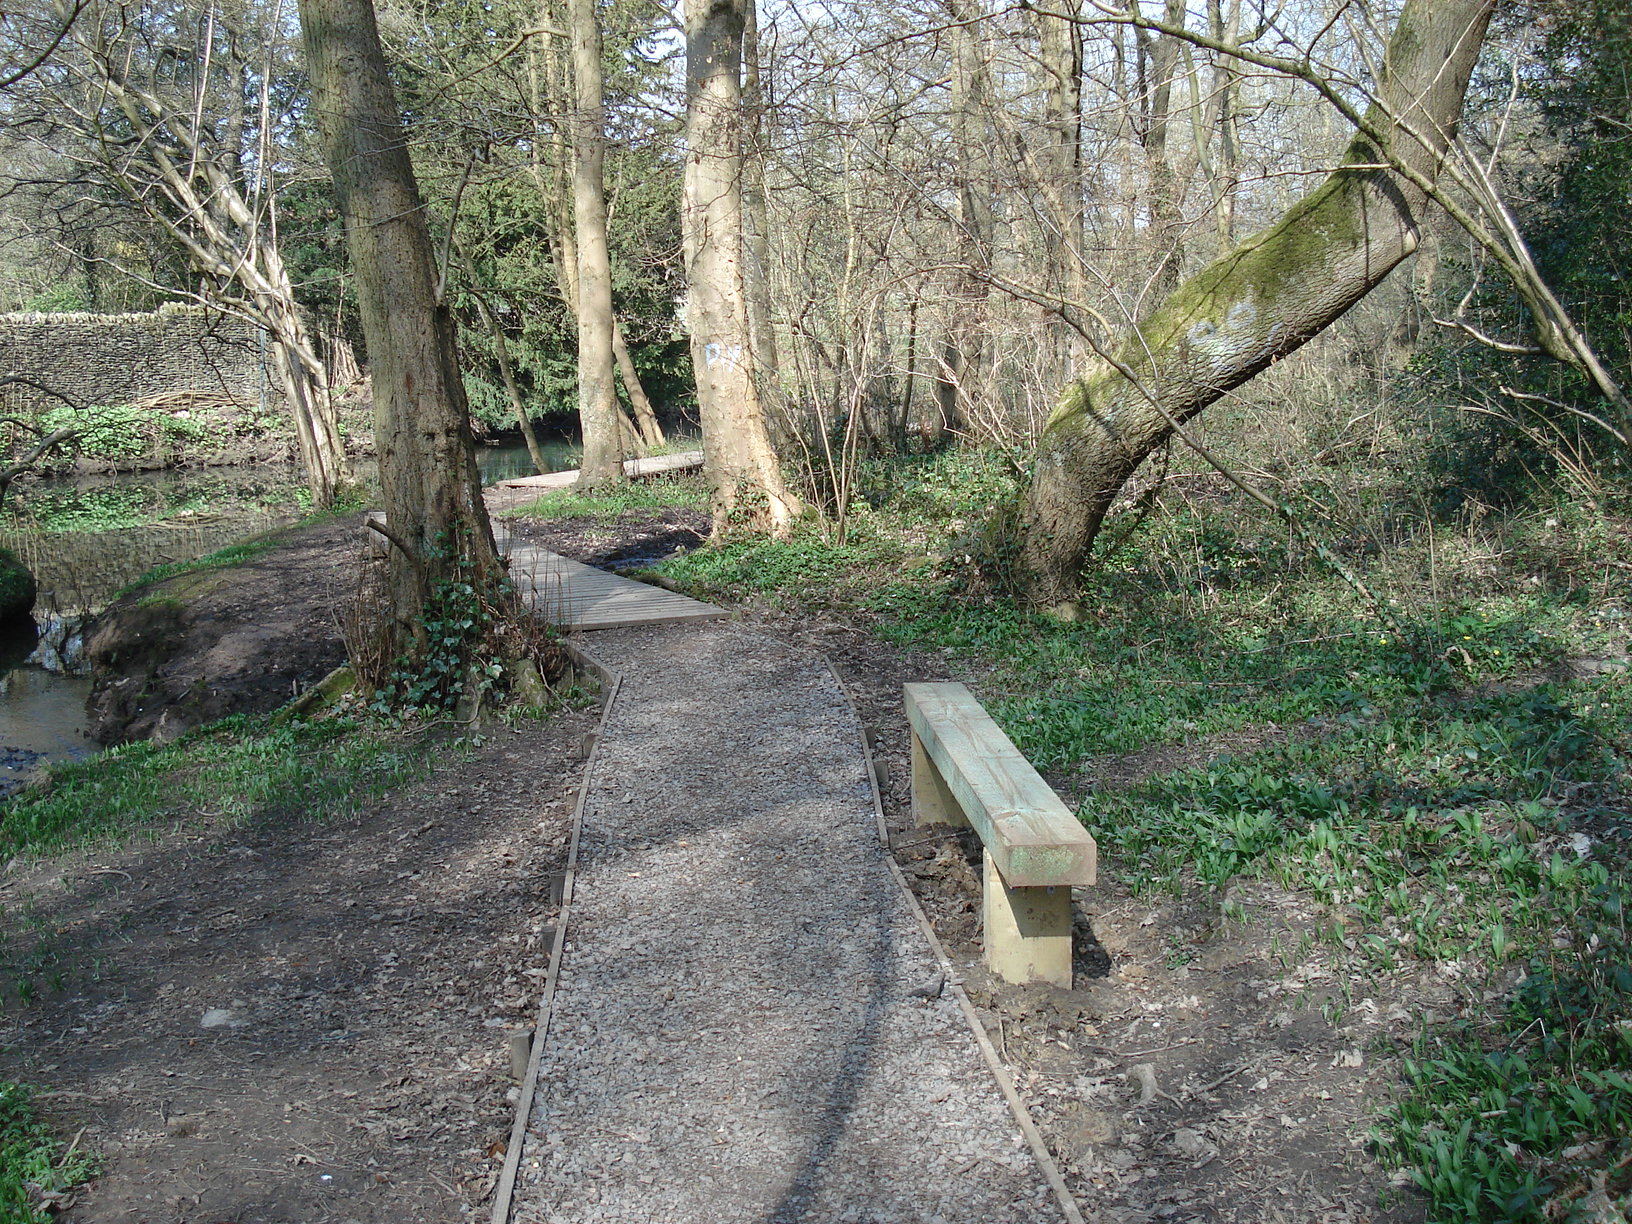 showing one of the many accessible foot paths through a wooded area along a river bank